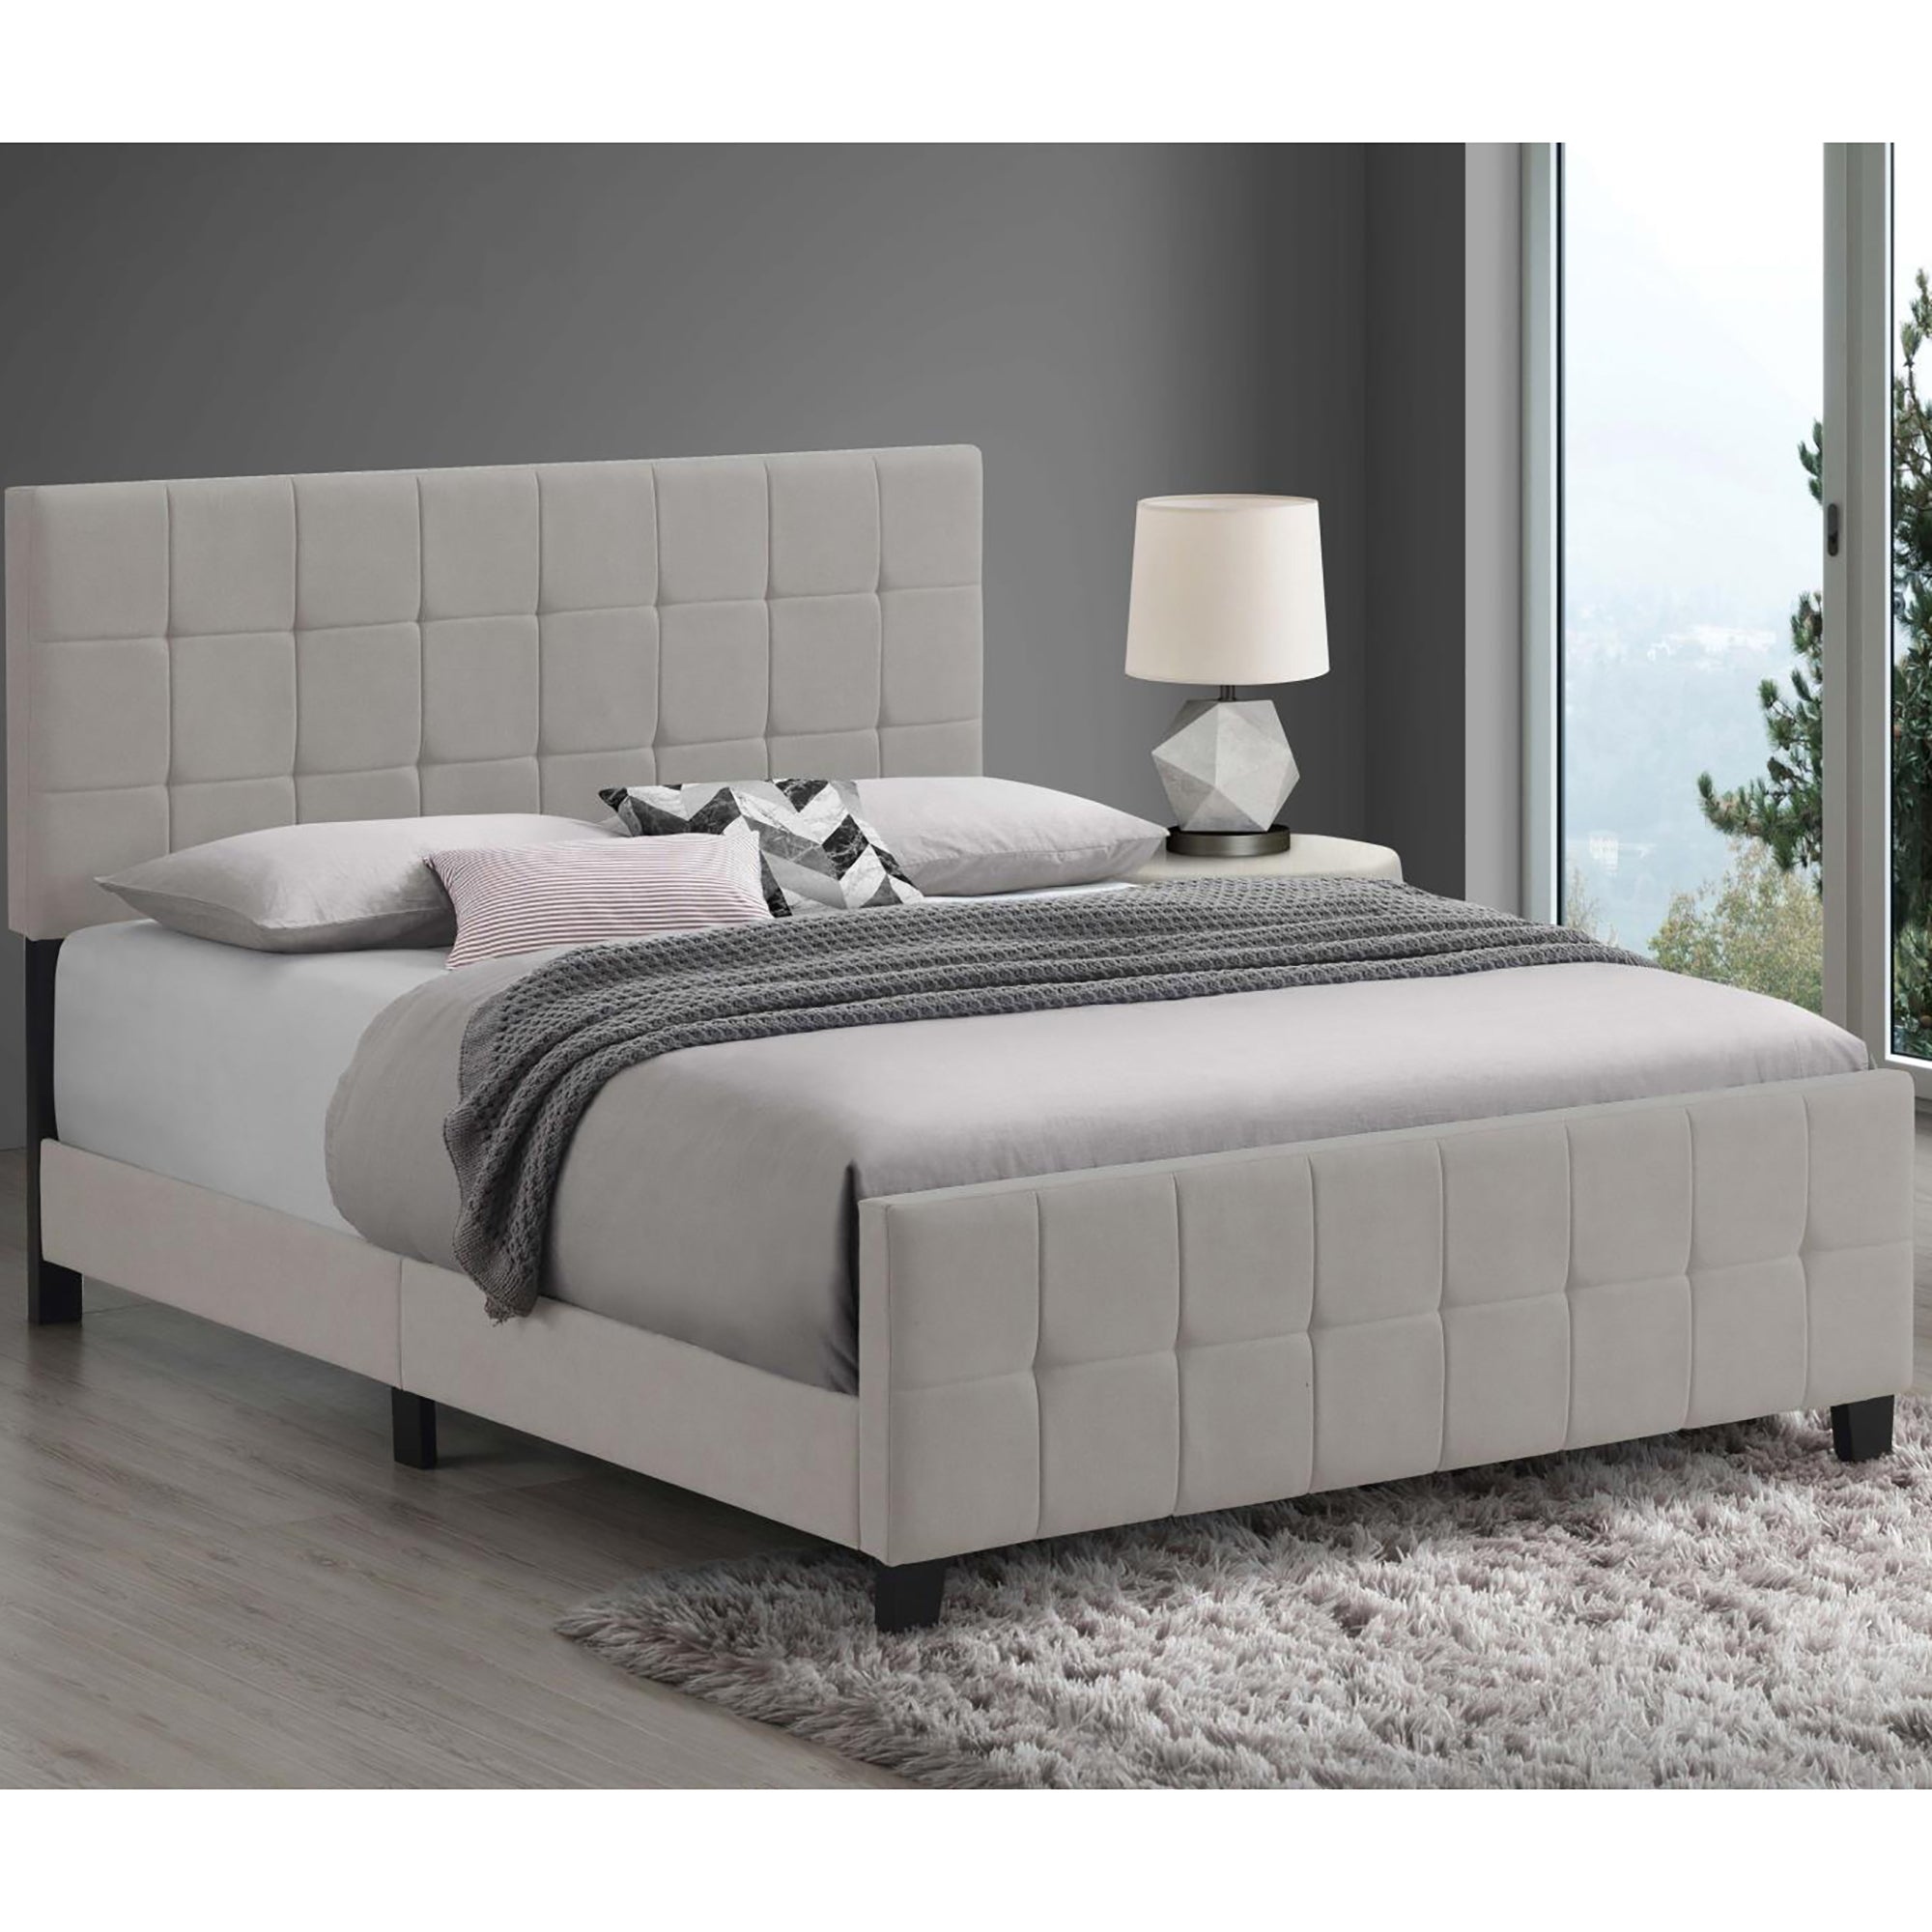 Beige Tufted Upholstered Queen Panel Bed box spring